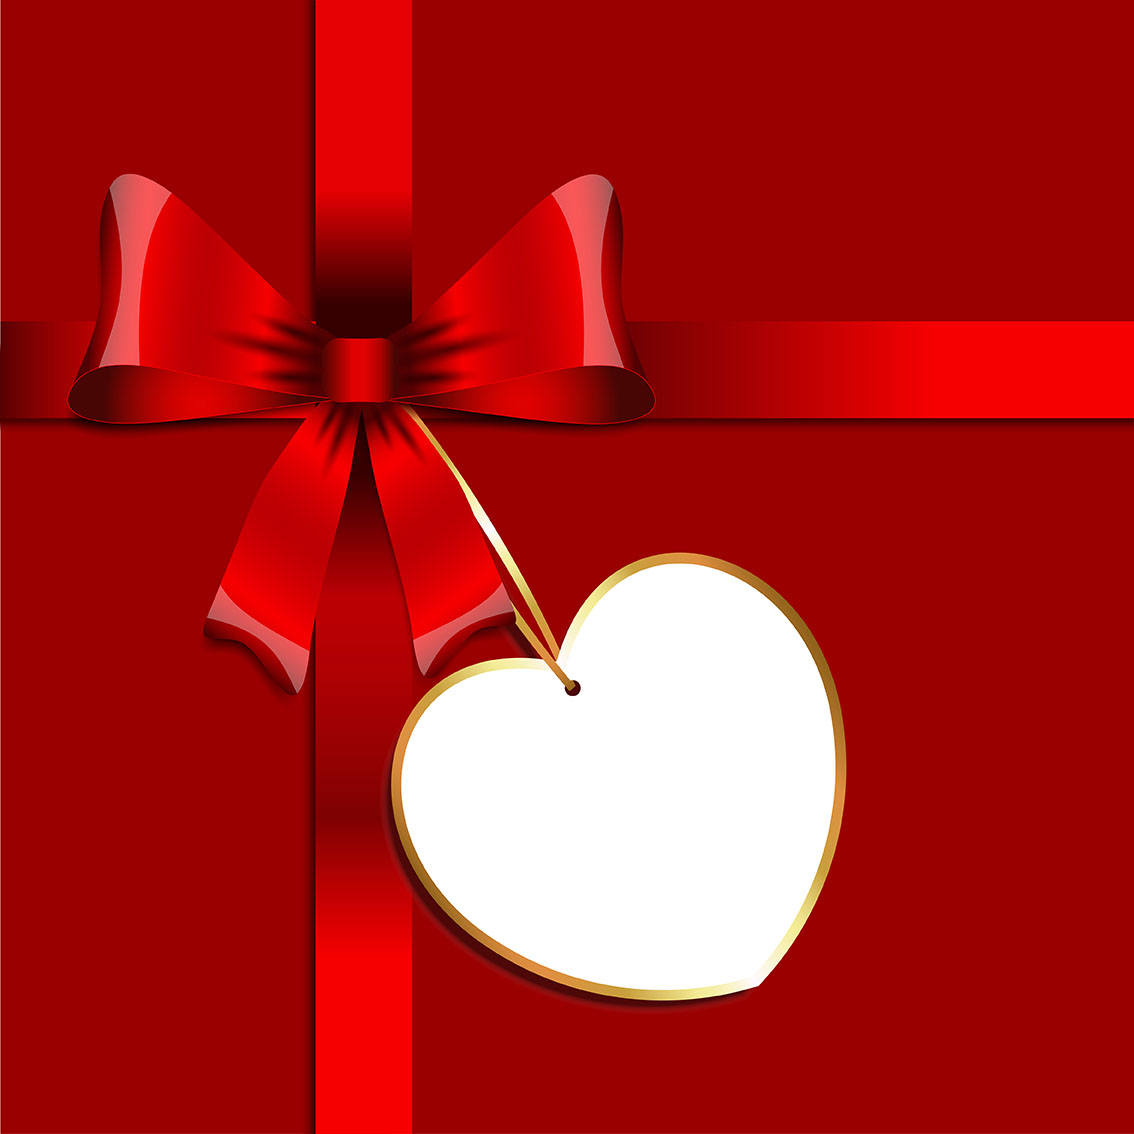 Valentines Day gift 234350 Download Free Vectors